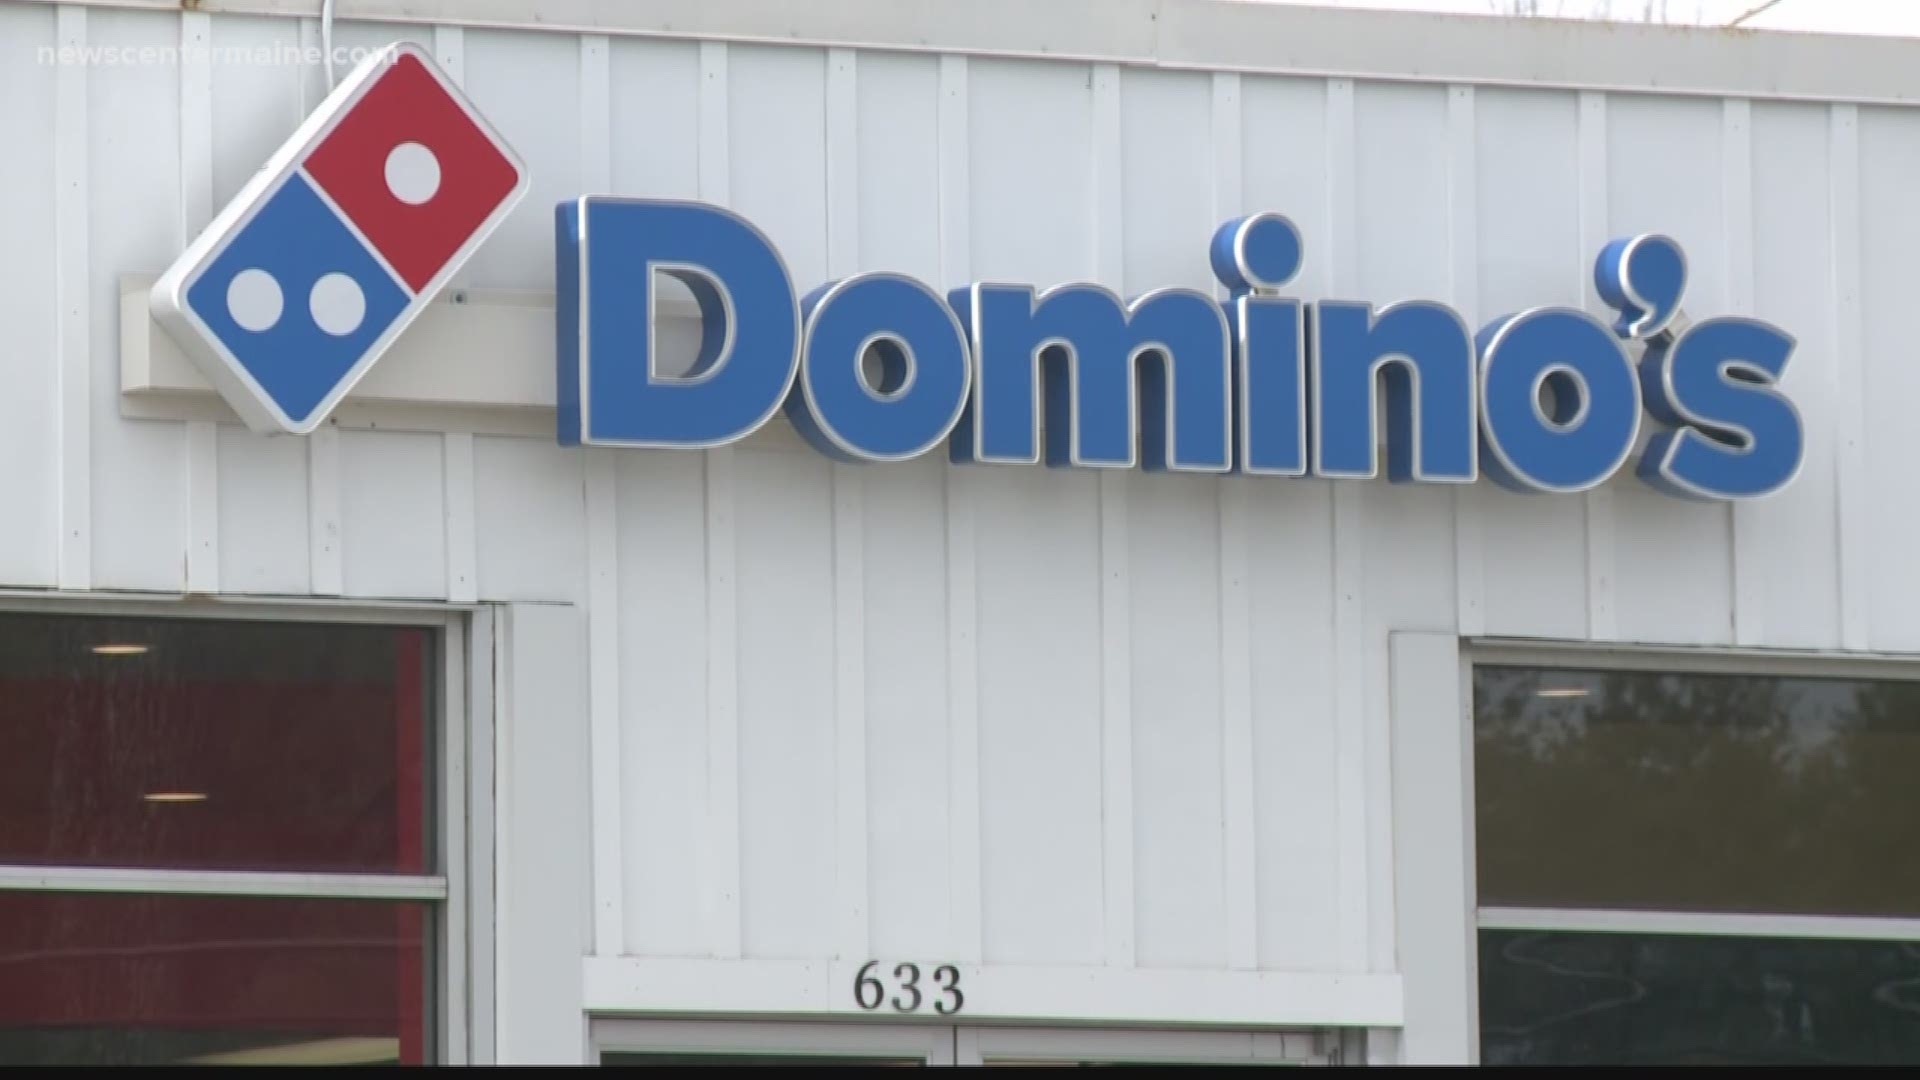 Another armed robbery at a Domino's pizza in Gorham